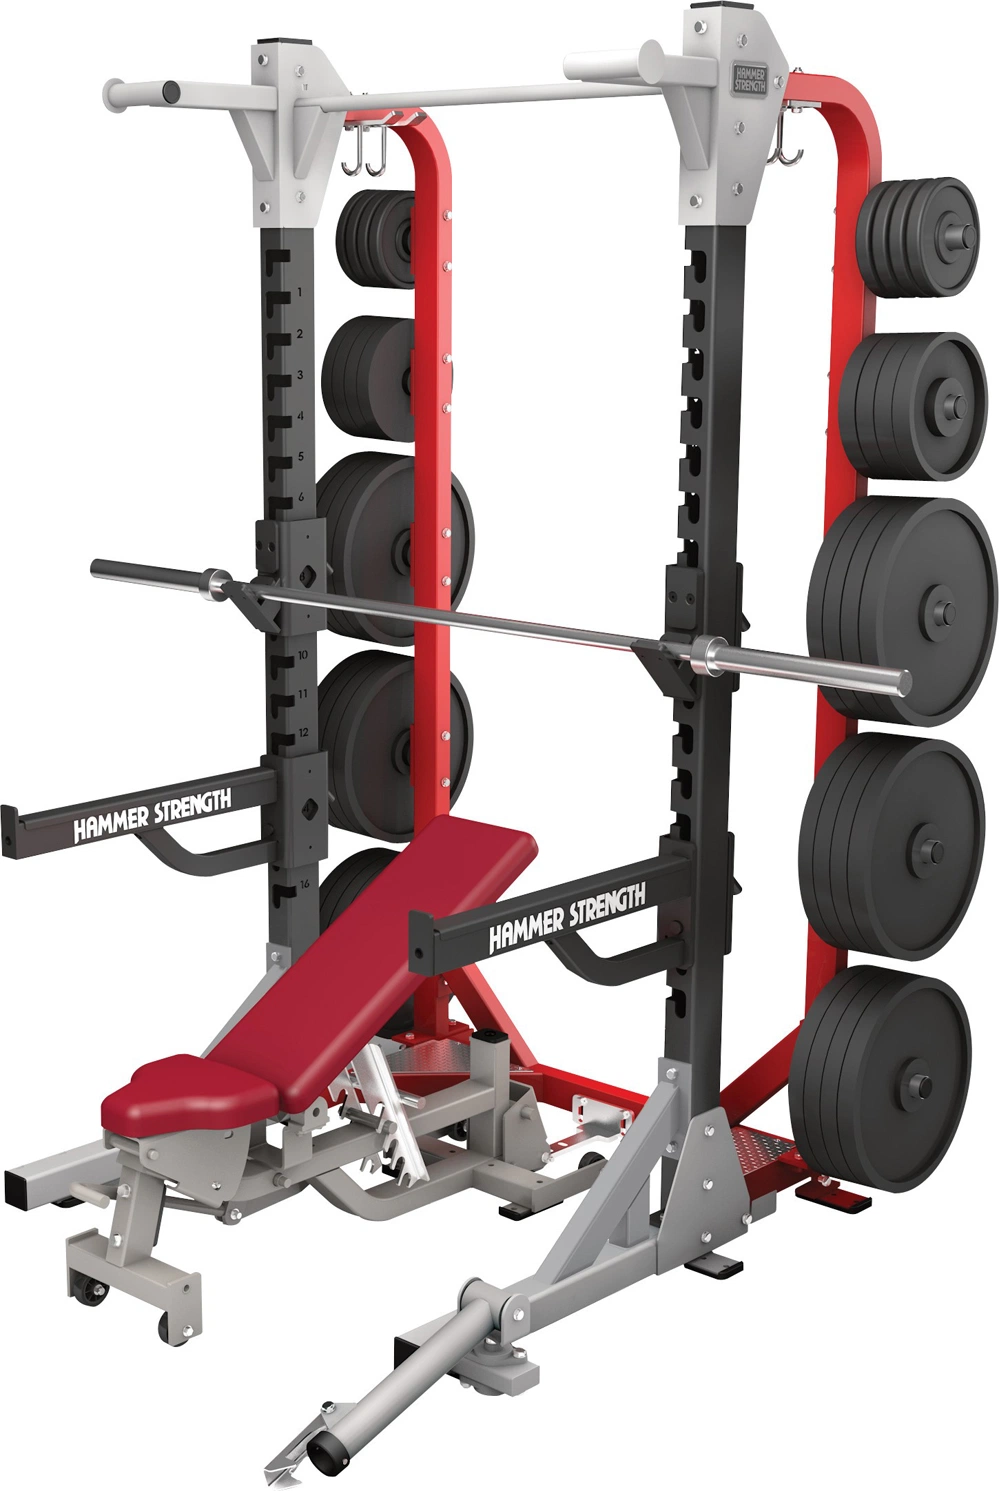 gym equipment,commercial fitness machine,power rack and bench,Bar support-(12 Bars) -FW-611